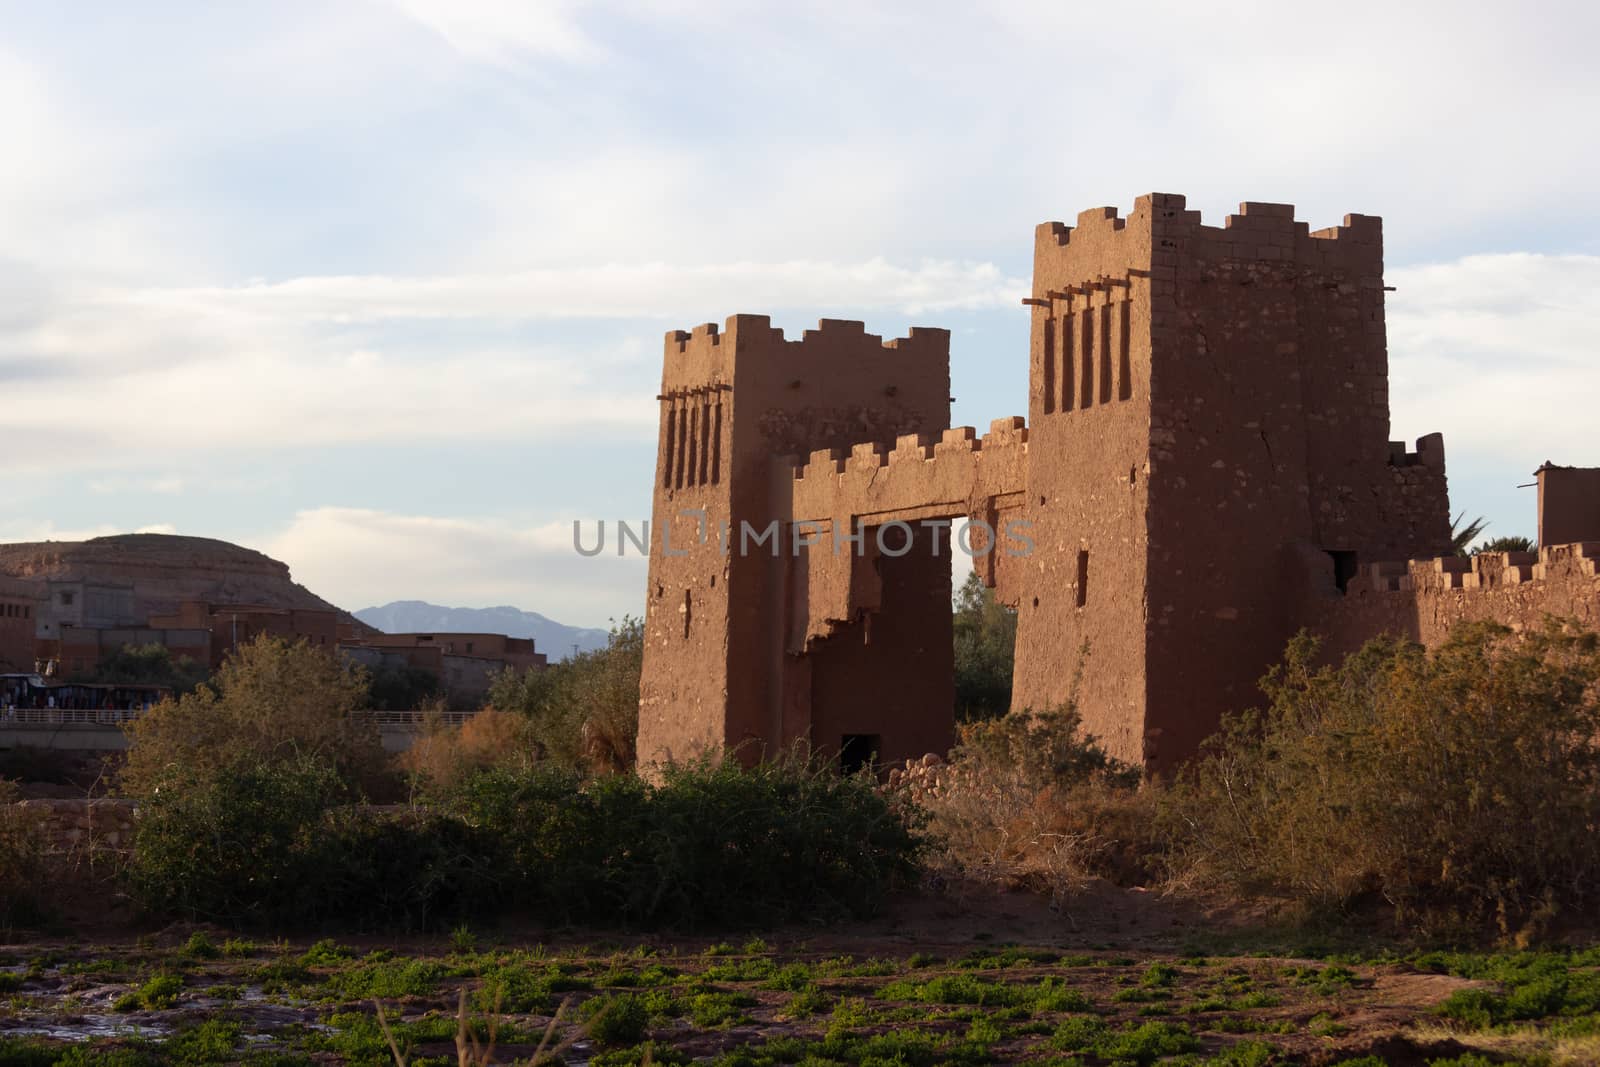 Ait Ben Haddou ksar Morocco, ancient fortress that is a Unesco Heritage site by kgboxford